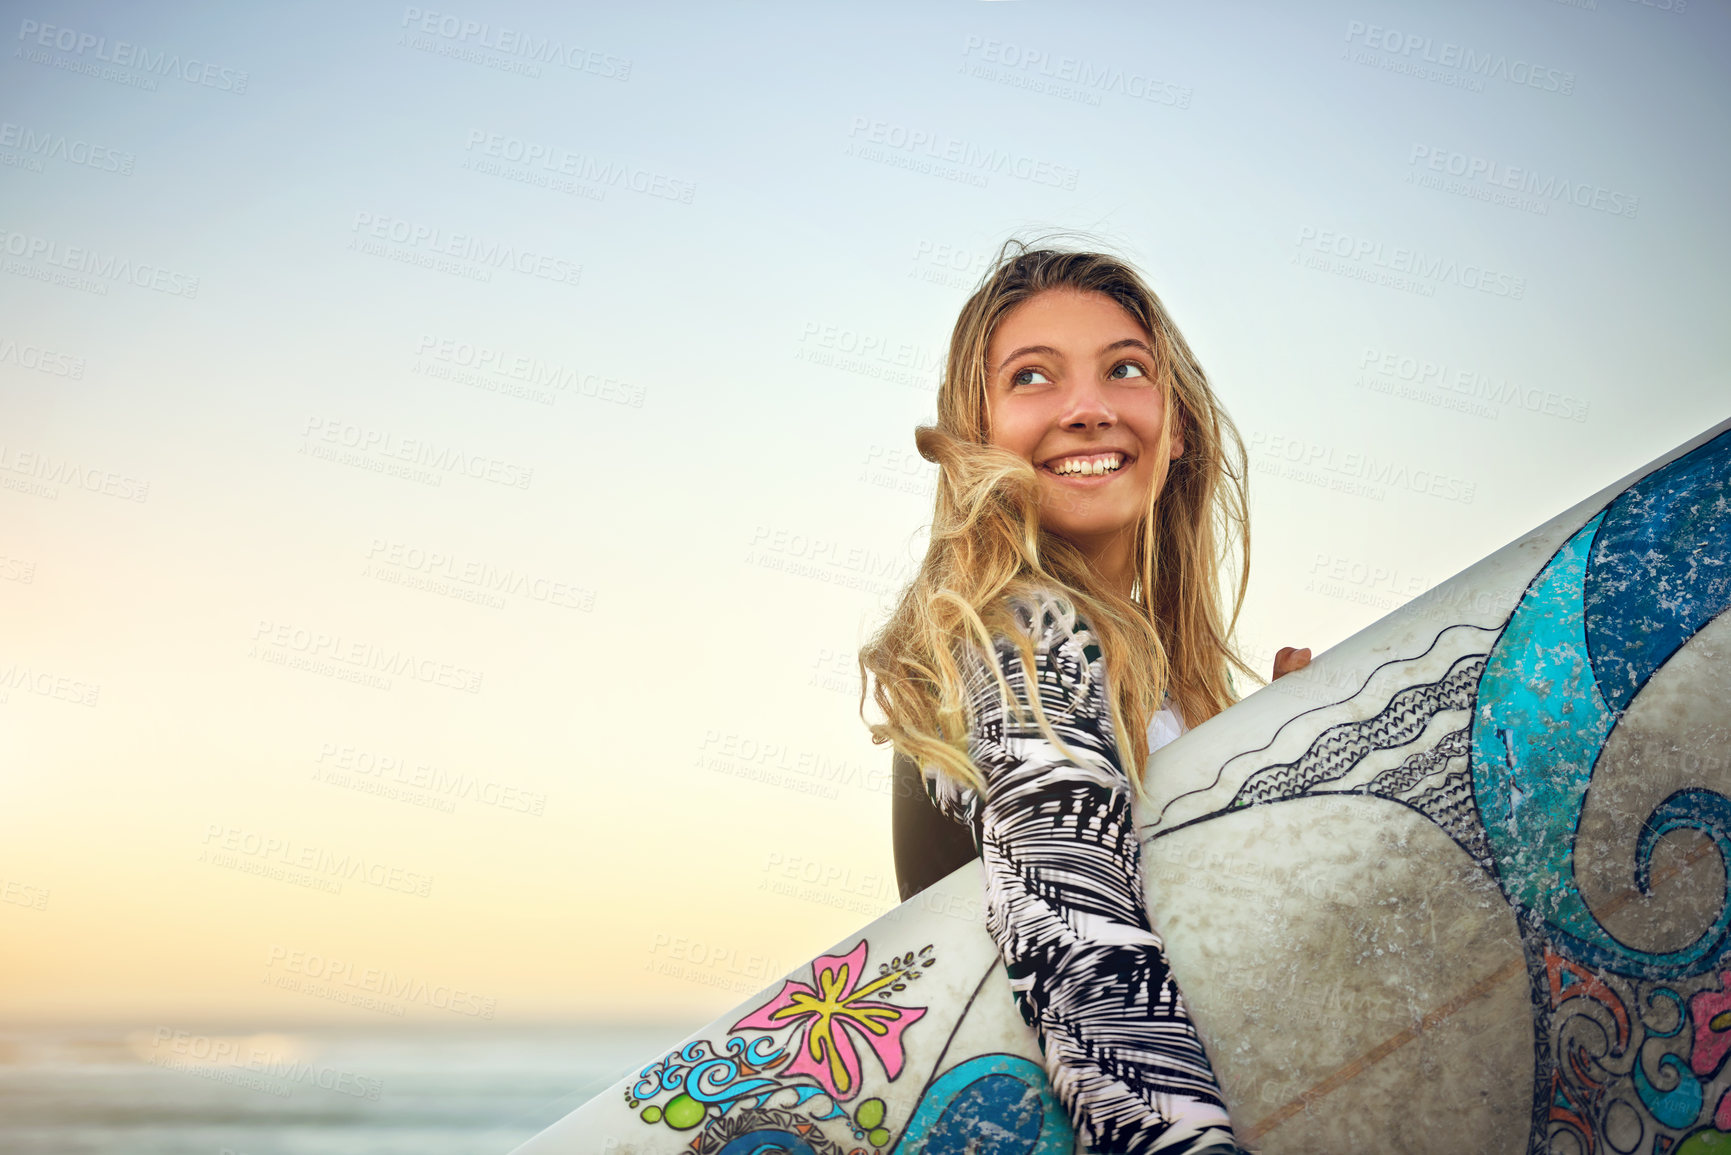 Buy stock photo Cropped shot of an attractive young female surfer standing with her surfboard on the beach